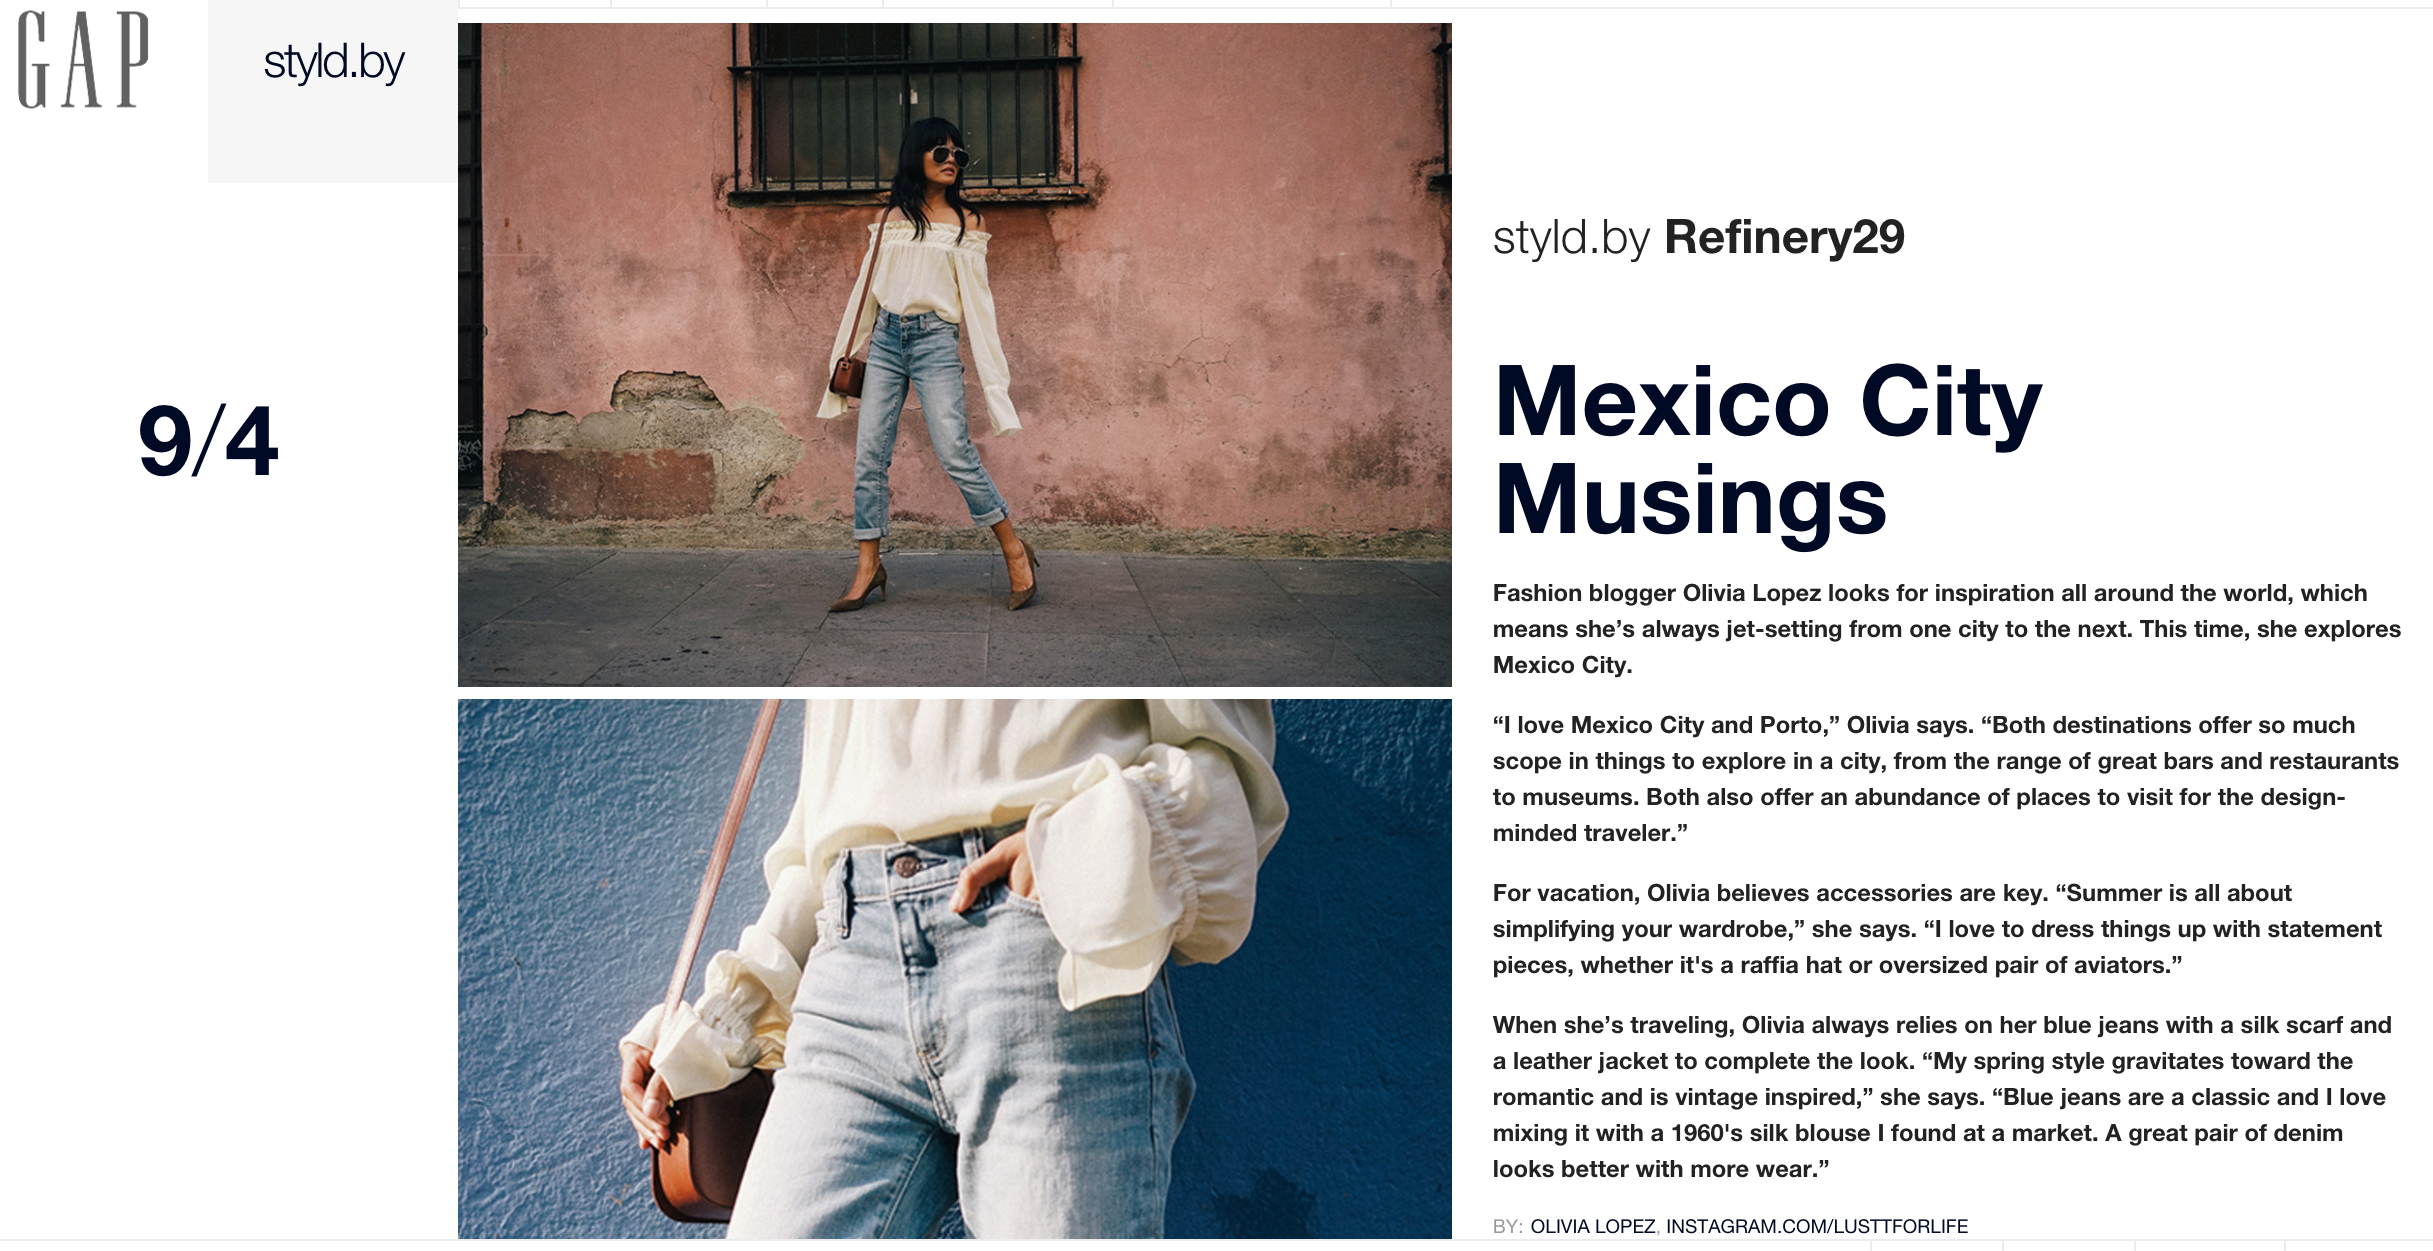 Gap – Styld.by Influencer Marketing Campaign